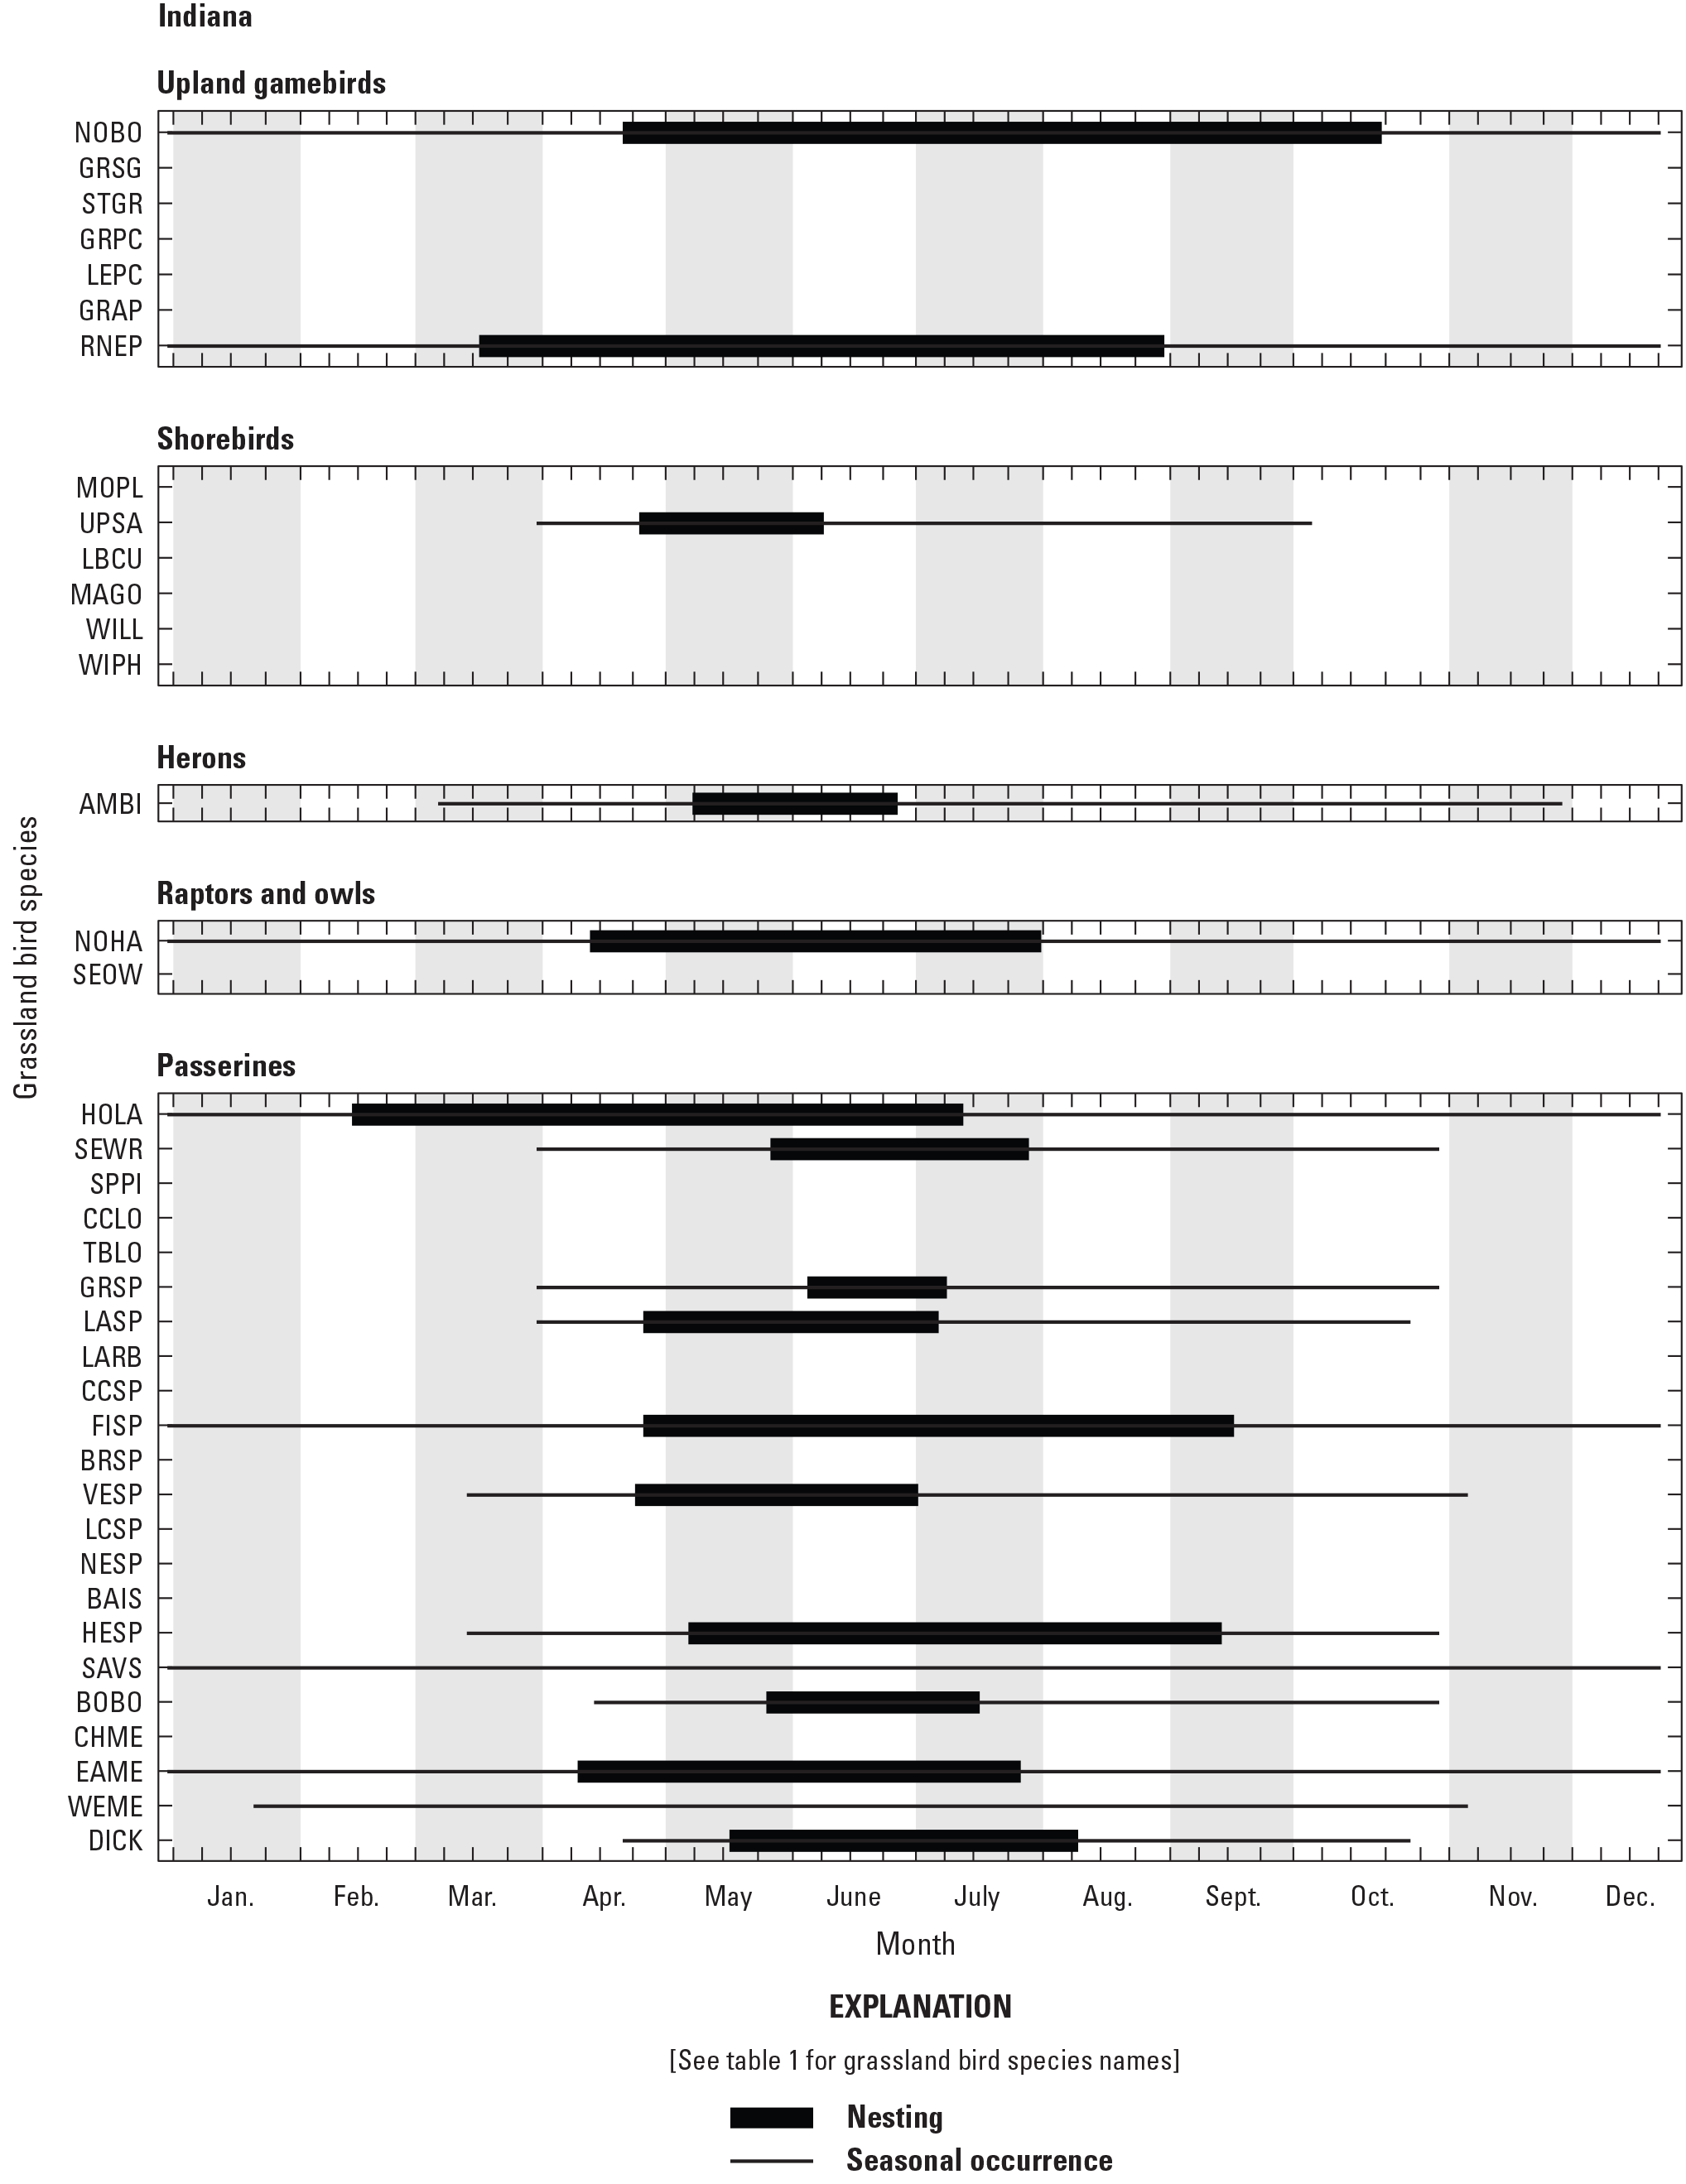 Figure showing seasonal occurrence and nesting phenology for 38 grassland bird species
               in Indiana, United States.